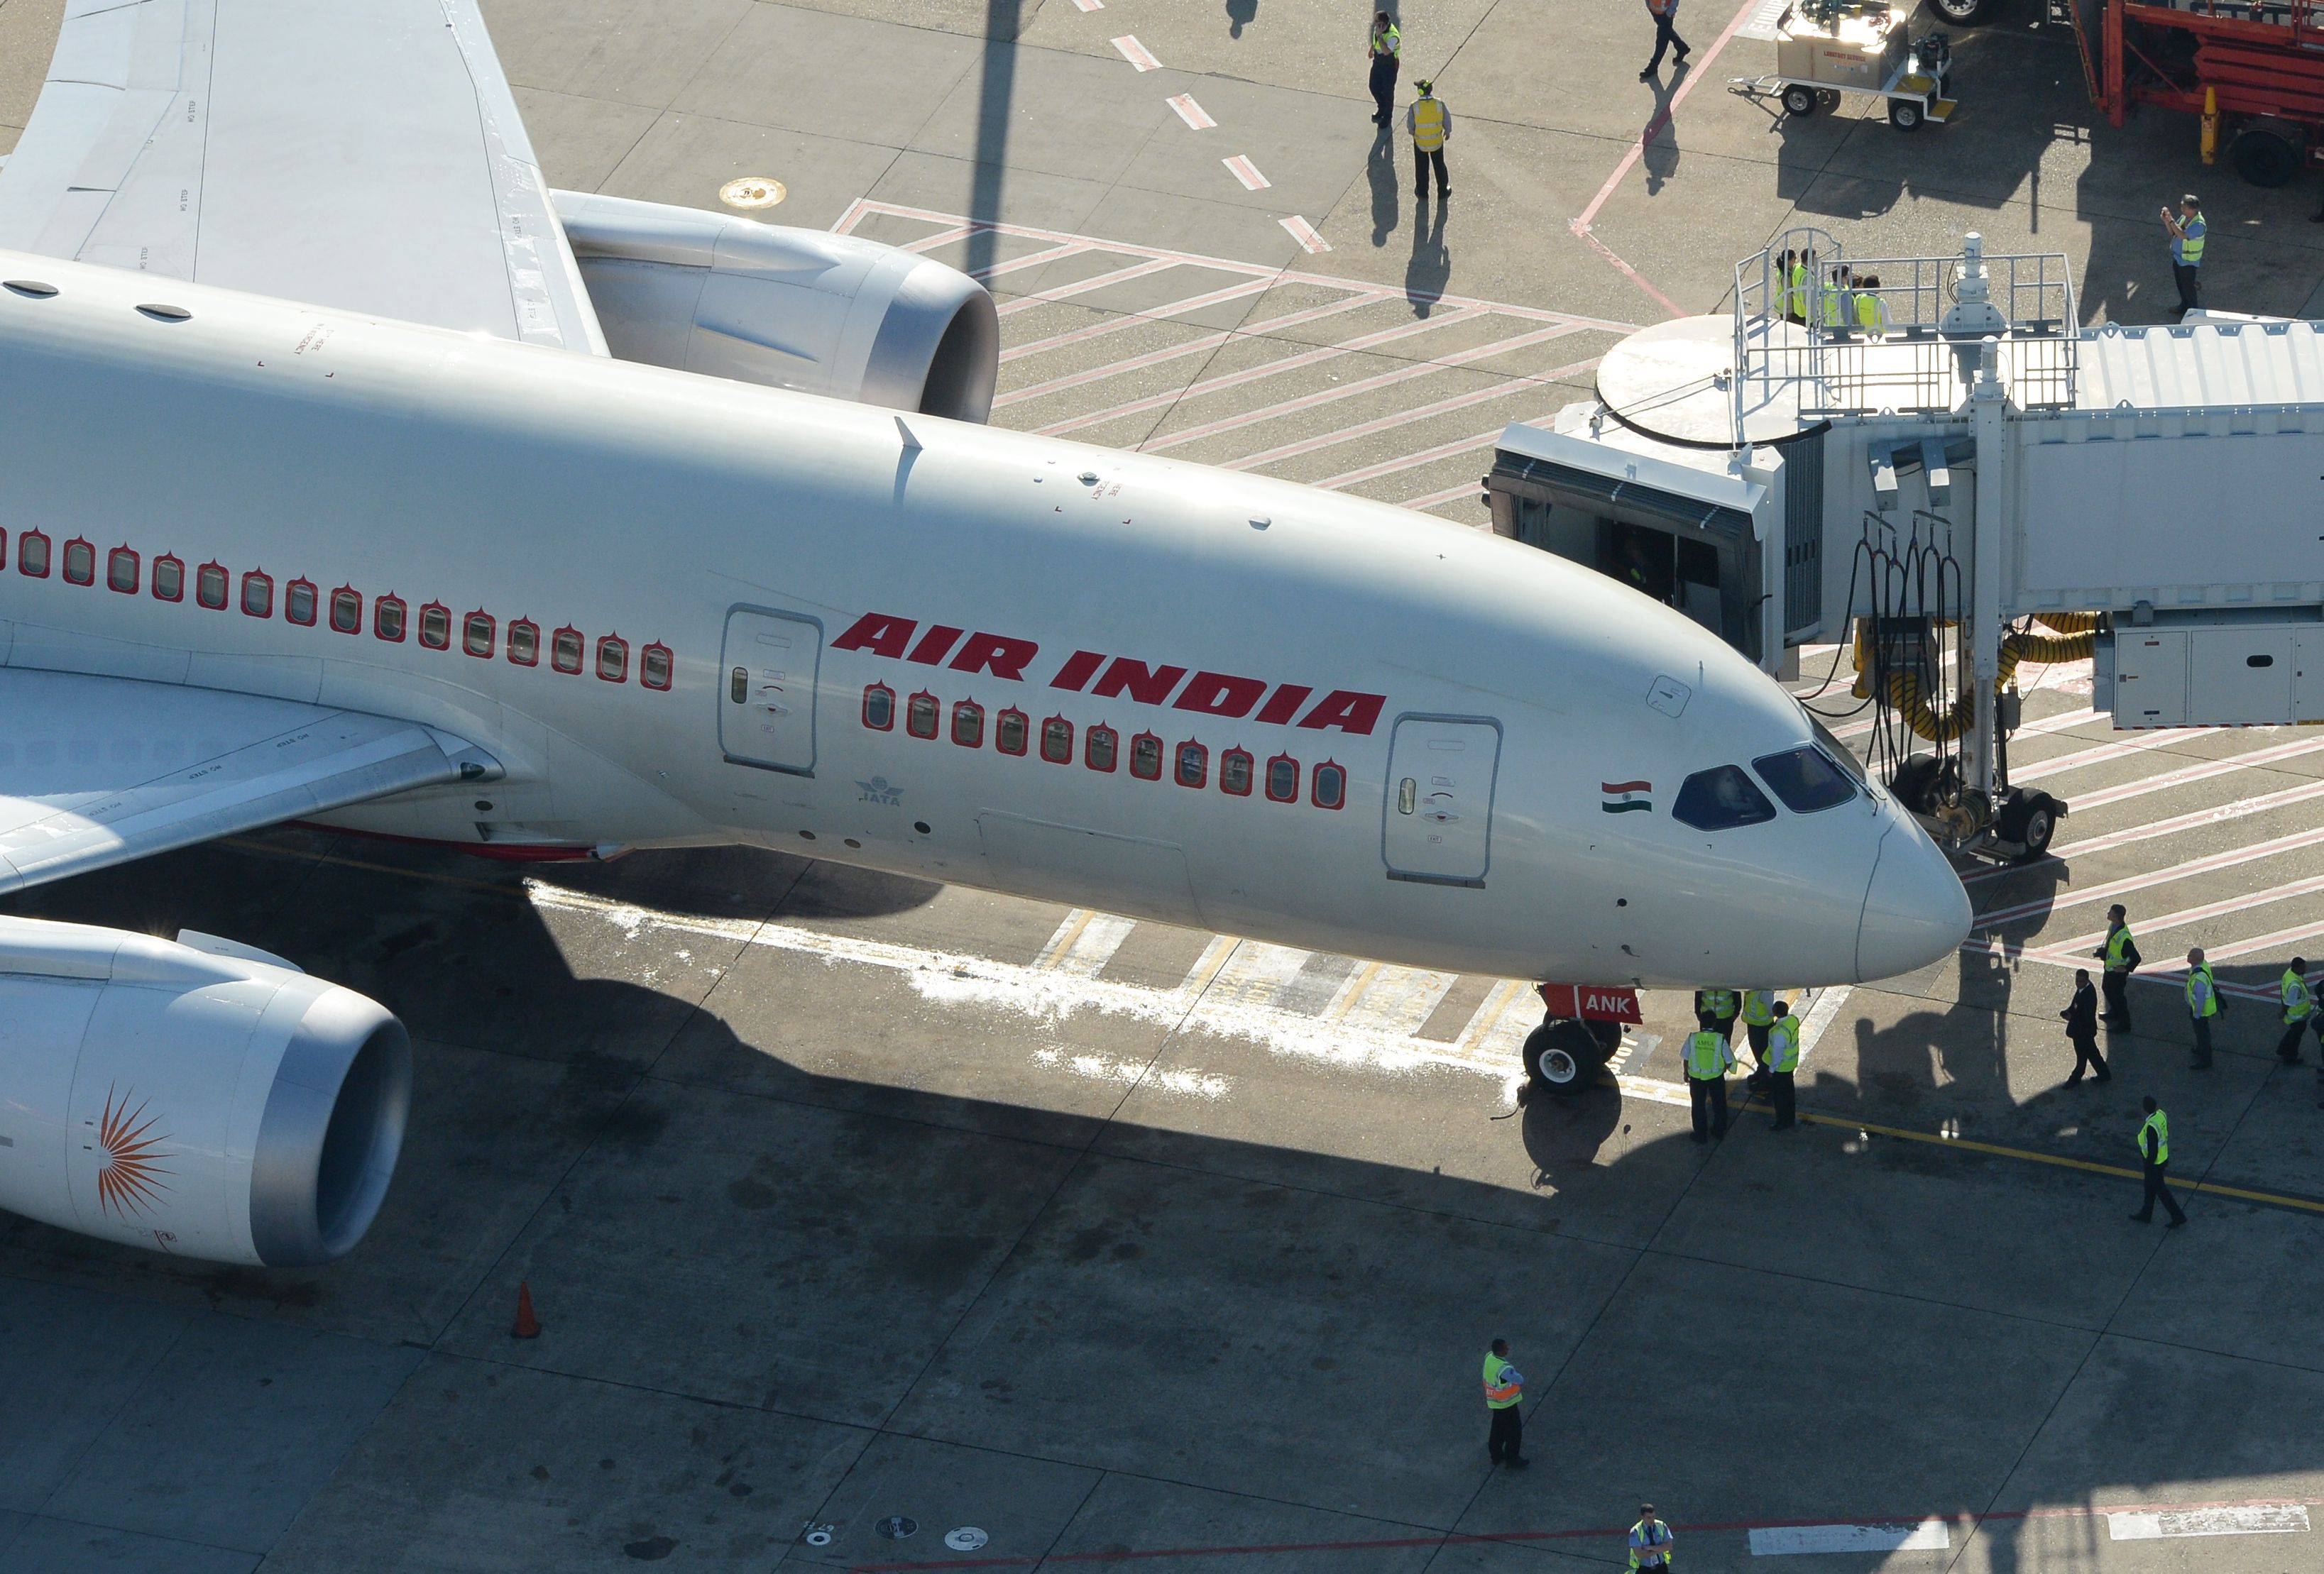  Air India Boeing 787 arrives into Sydney